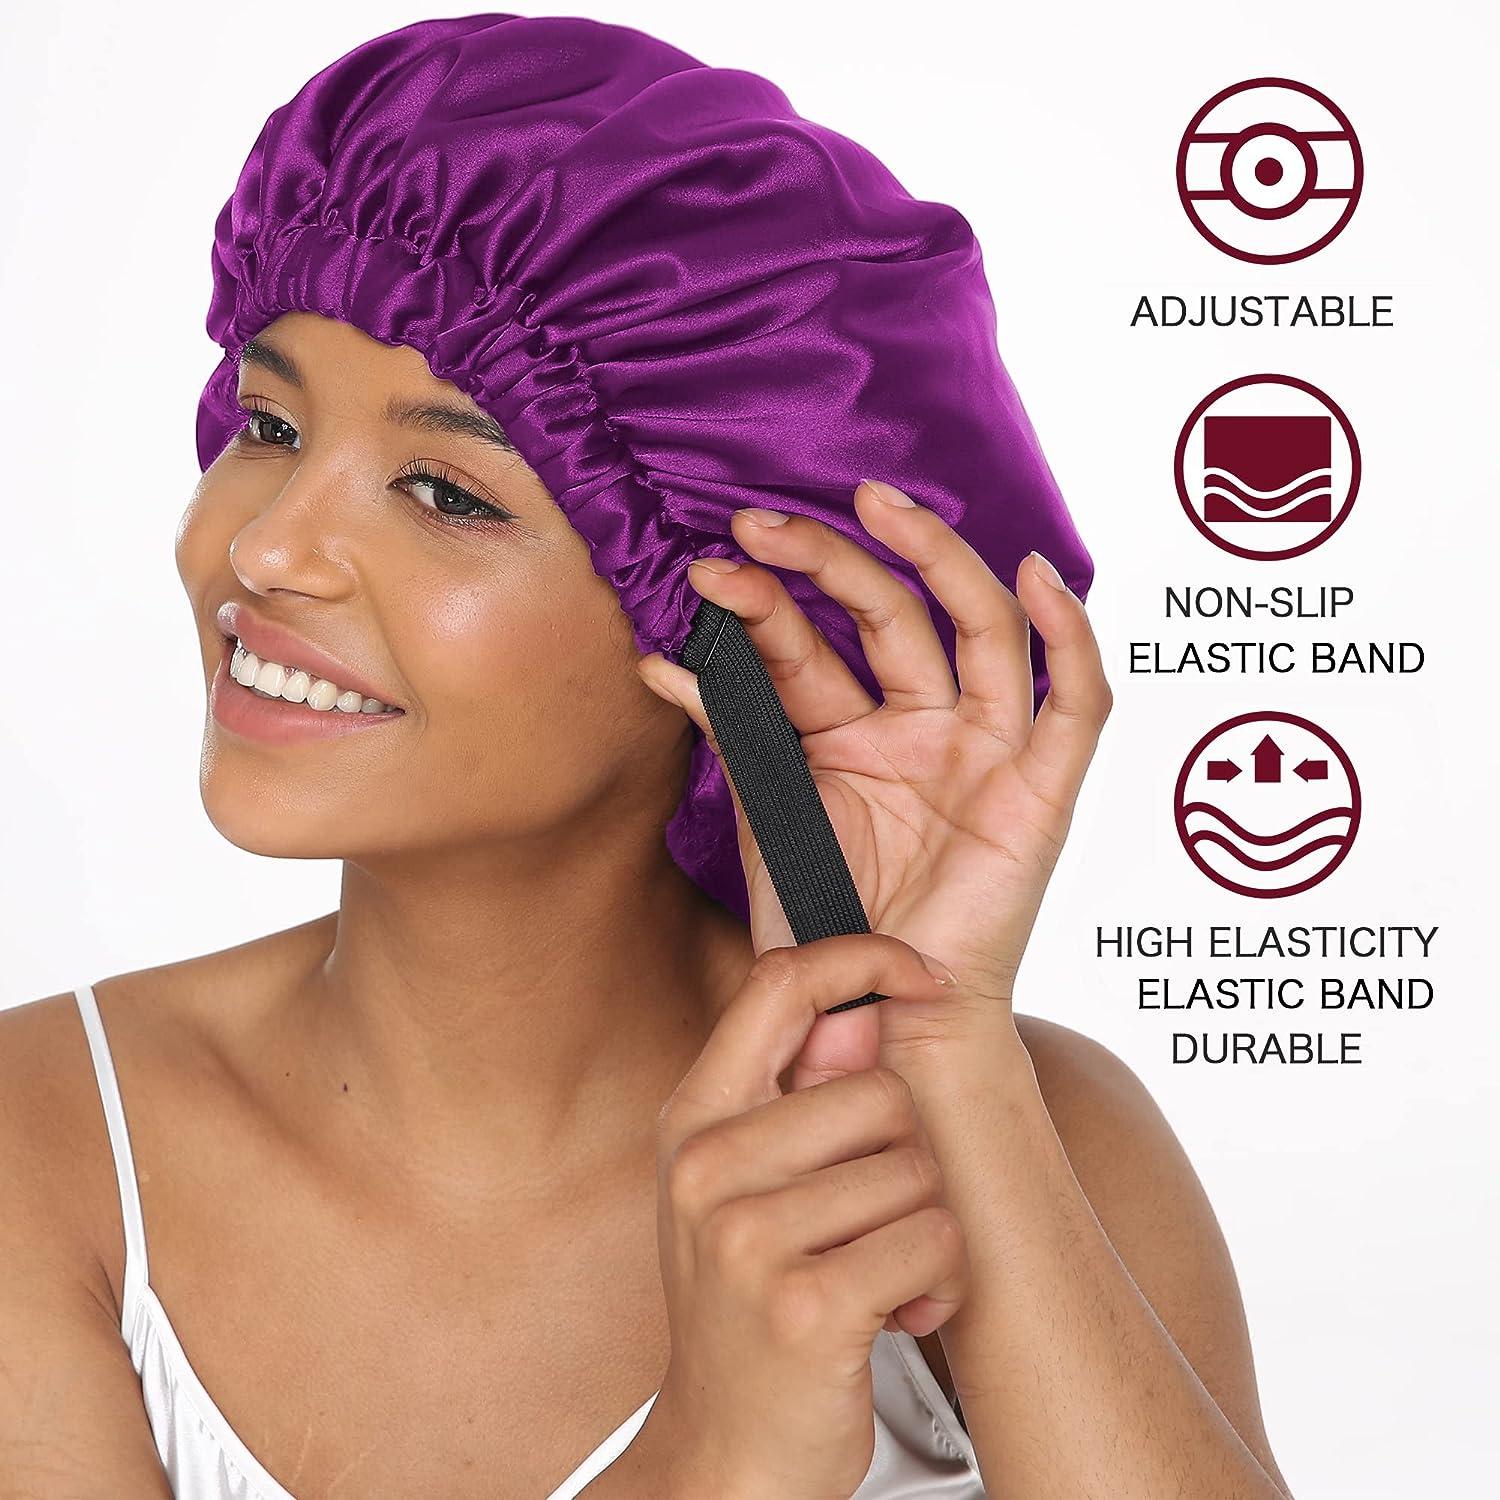  COMFYROLL Silk Satin Bonnet for Sleeping and Hair Protection -  Adjustable, Double Layered Satin Cap for Women Curly Natural Hair : Beauty  & Personal Care